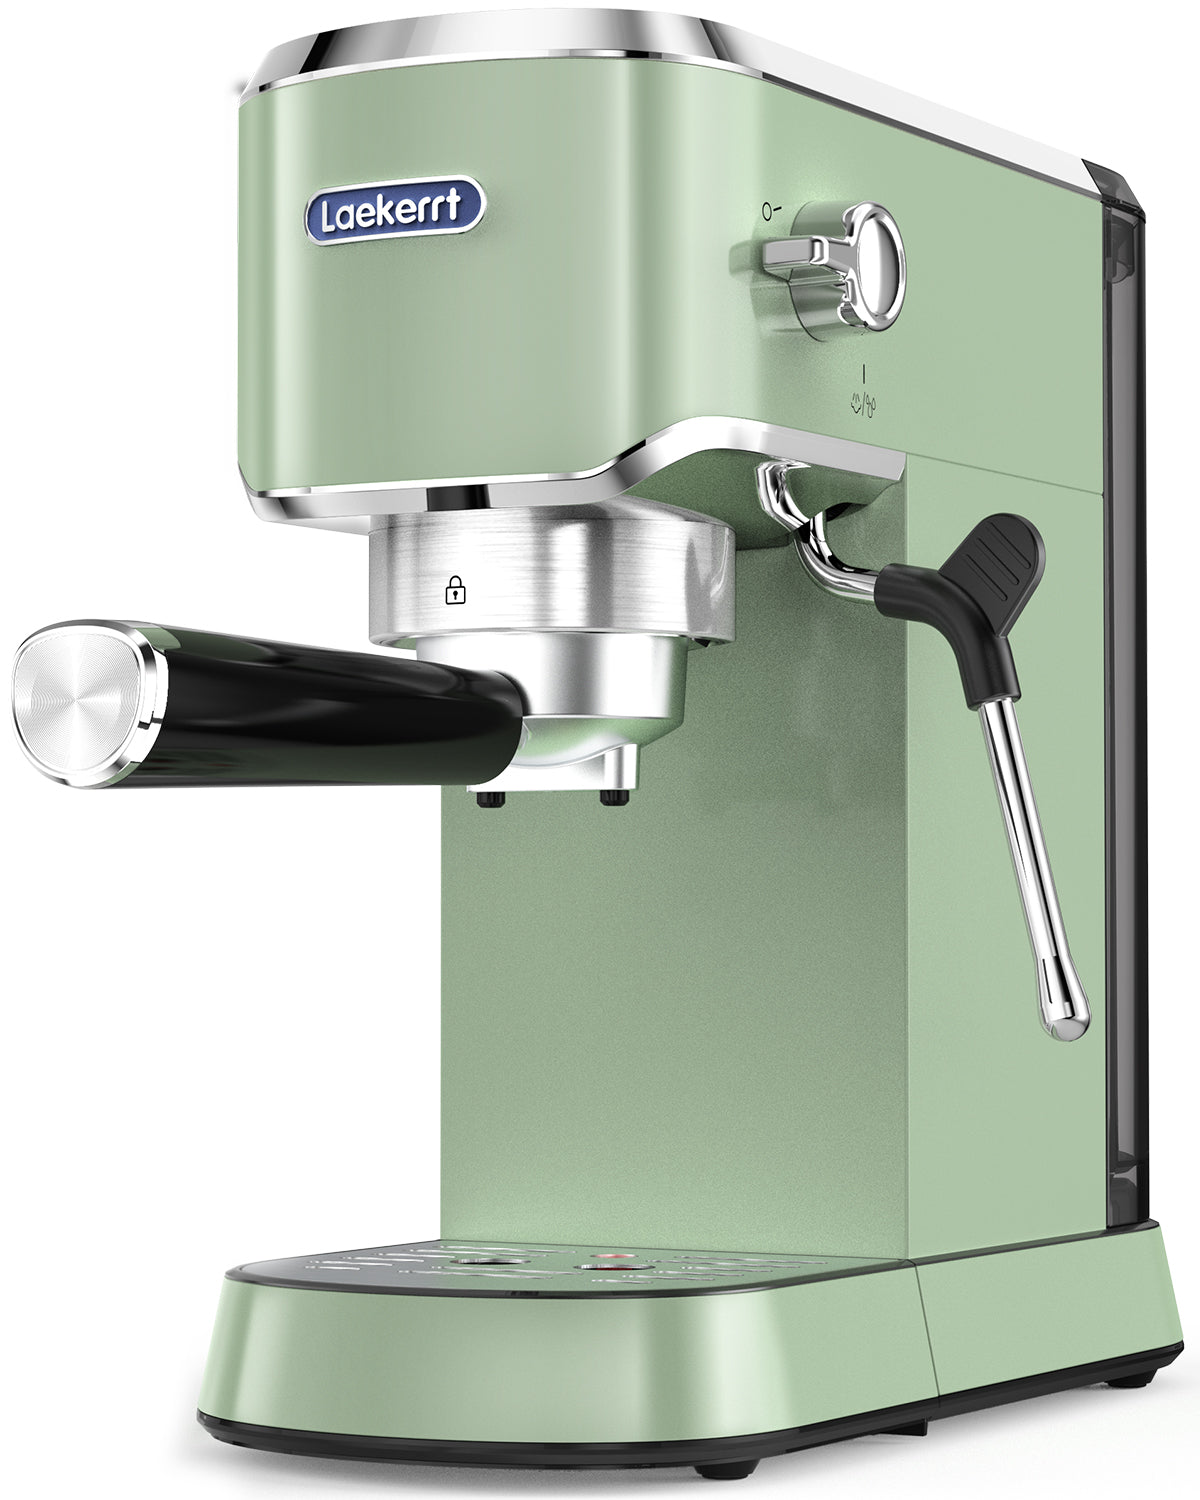 [Used - Very Good] Laekerrt Espresso Machine with Milk Frother Steamer, Home Expresso Coffee Machine for Cappuccino and Latte, Various colors and models, normal function, with use or test traces